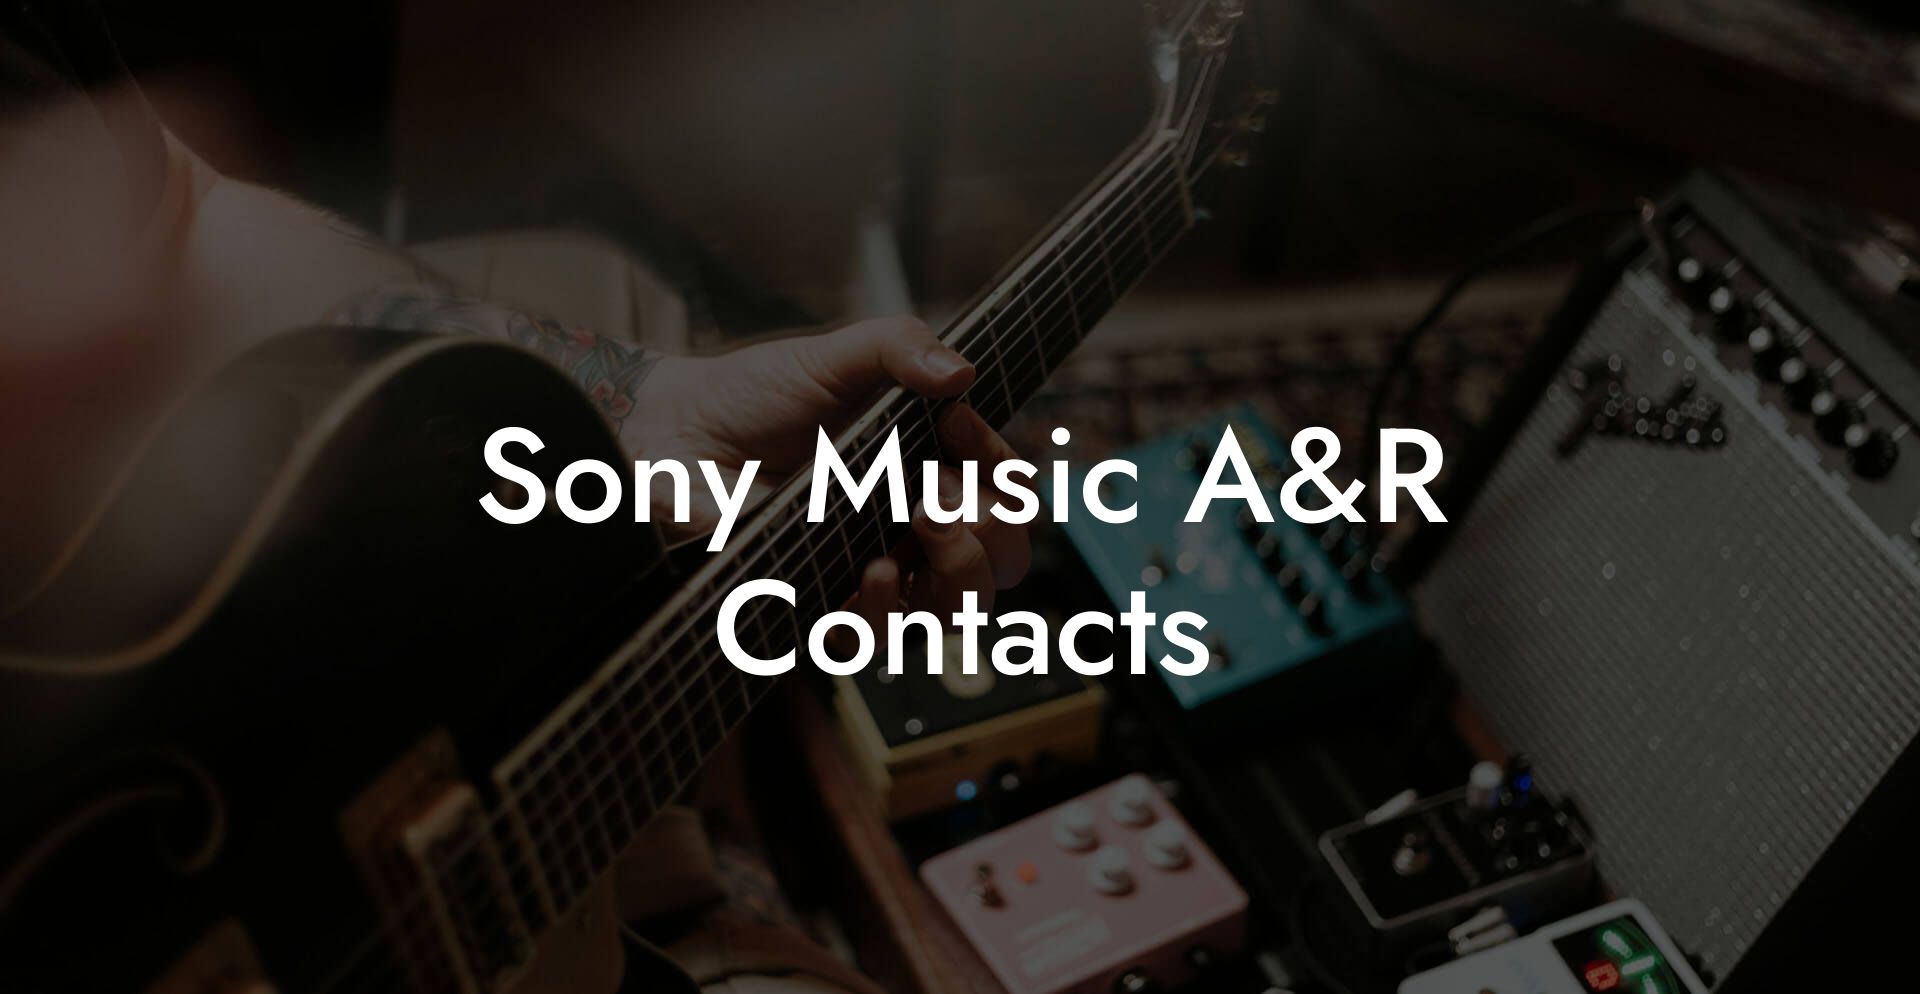 Sony Music A&R Contacts